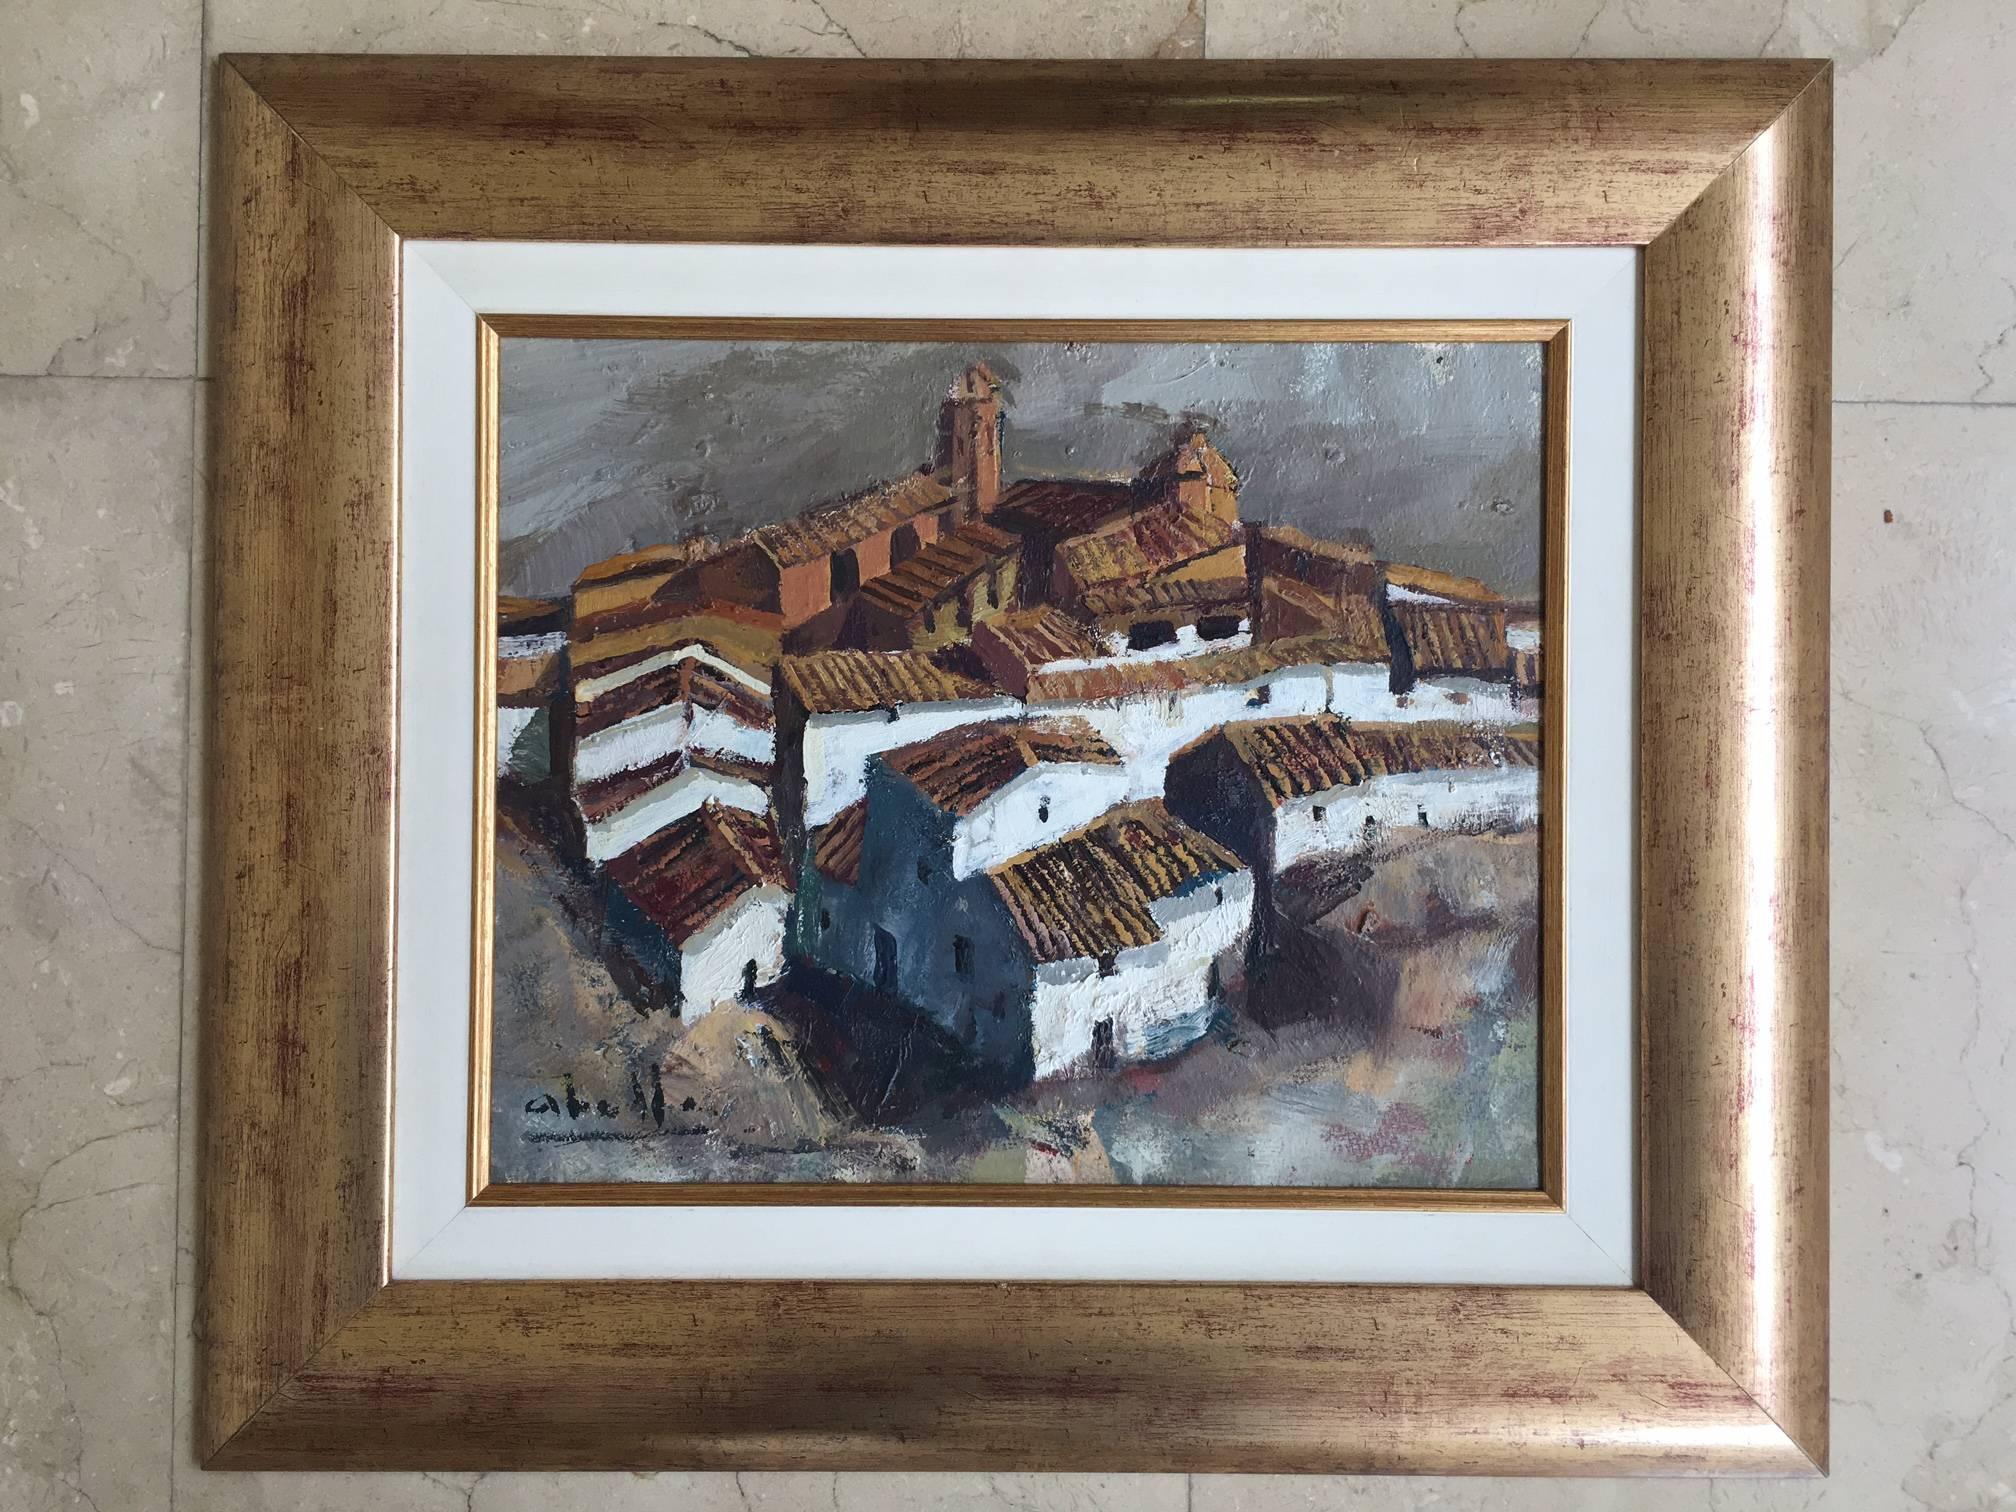 
Abella. Original landscape cubist acrylic painting 
Juan Jose Abella Rubio was born in Estercuel, a hamlet anchored in the Teruel mining basin in March 1944. In his painting the ocher and reddish colors of his first environment are well present.
In